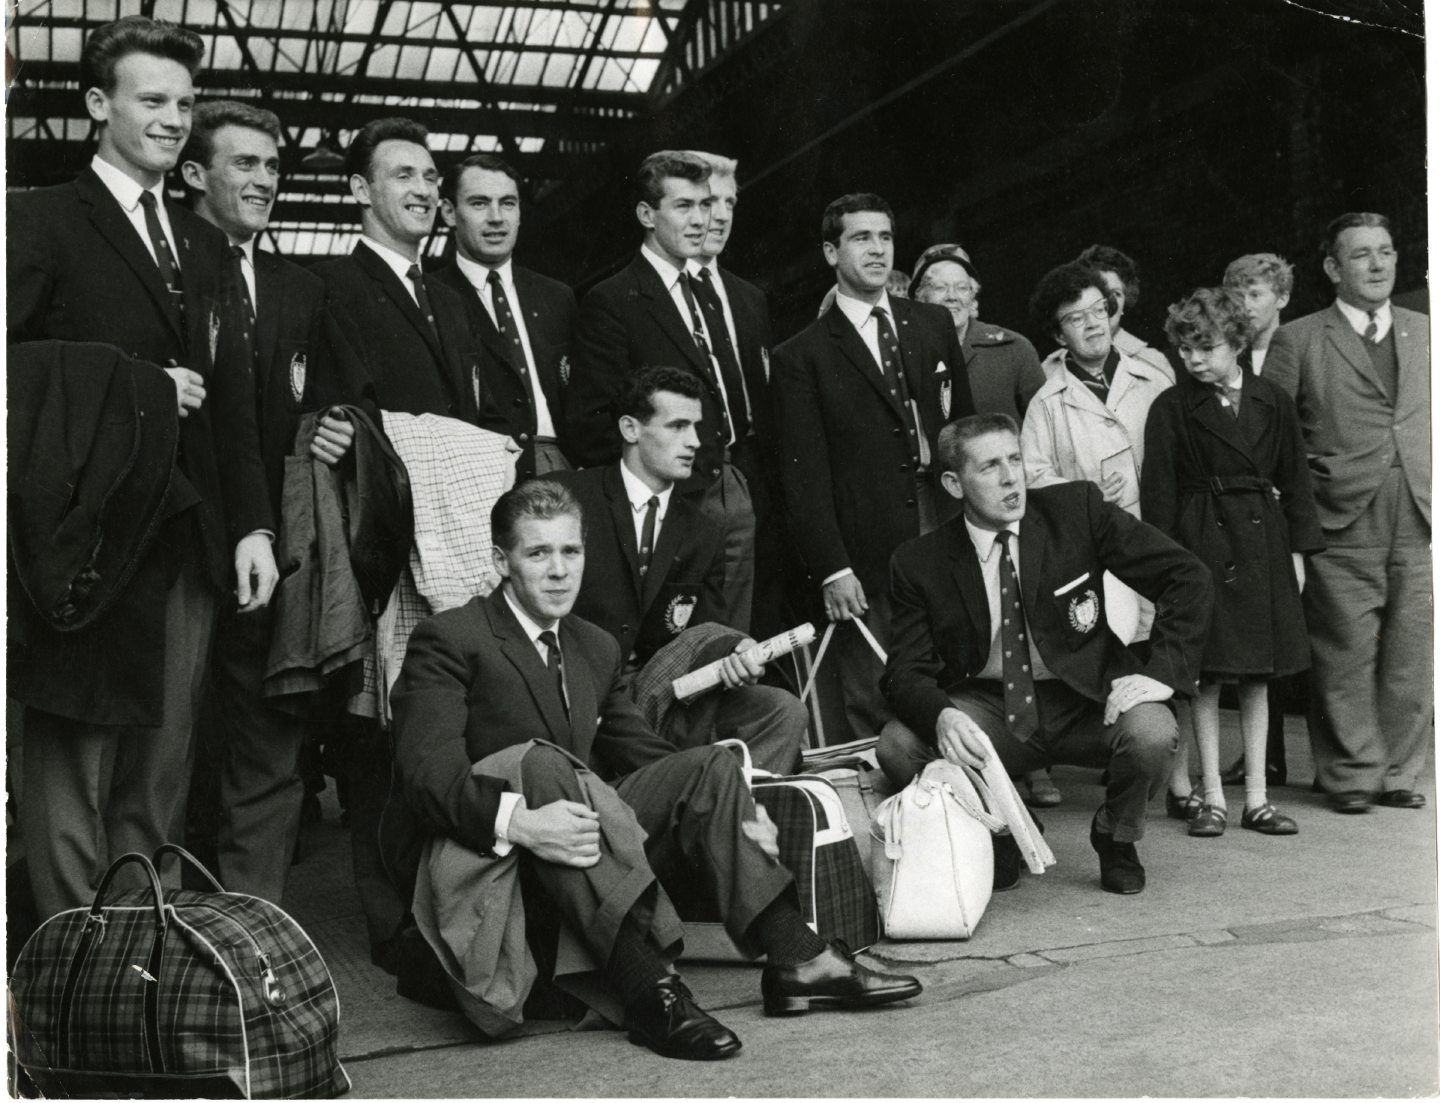 Dundee FC line-up at West Station before leaving for Cologne in September 1962 in the European Cup.